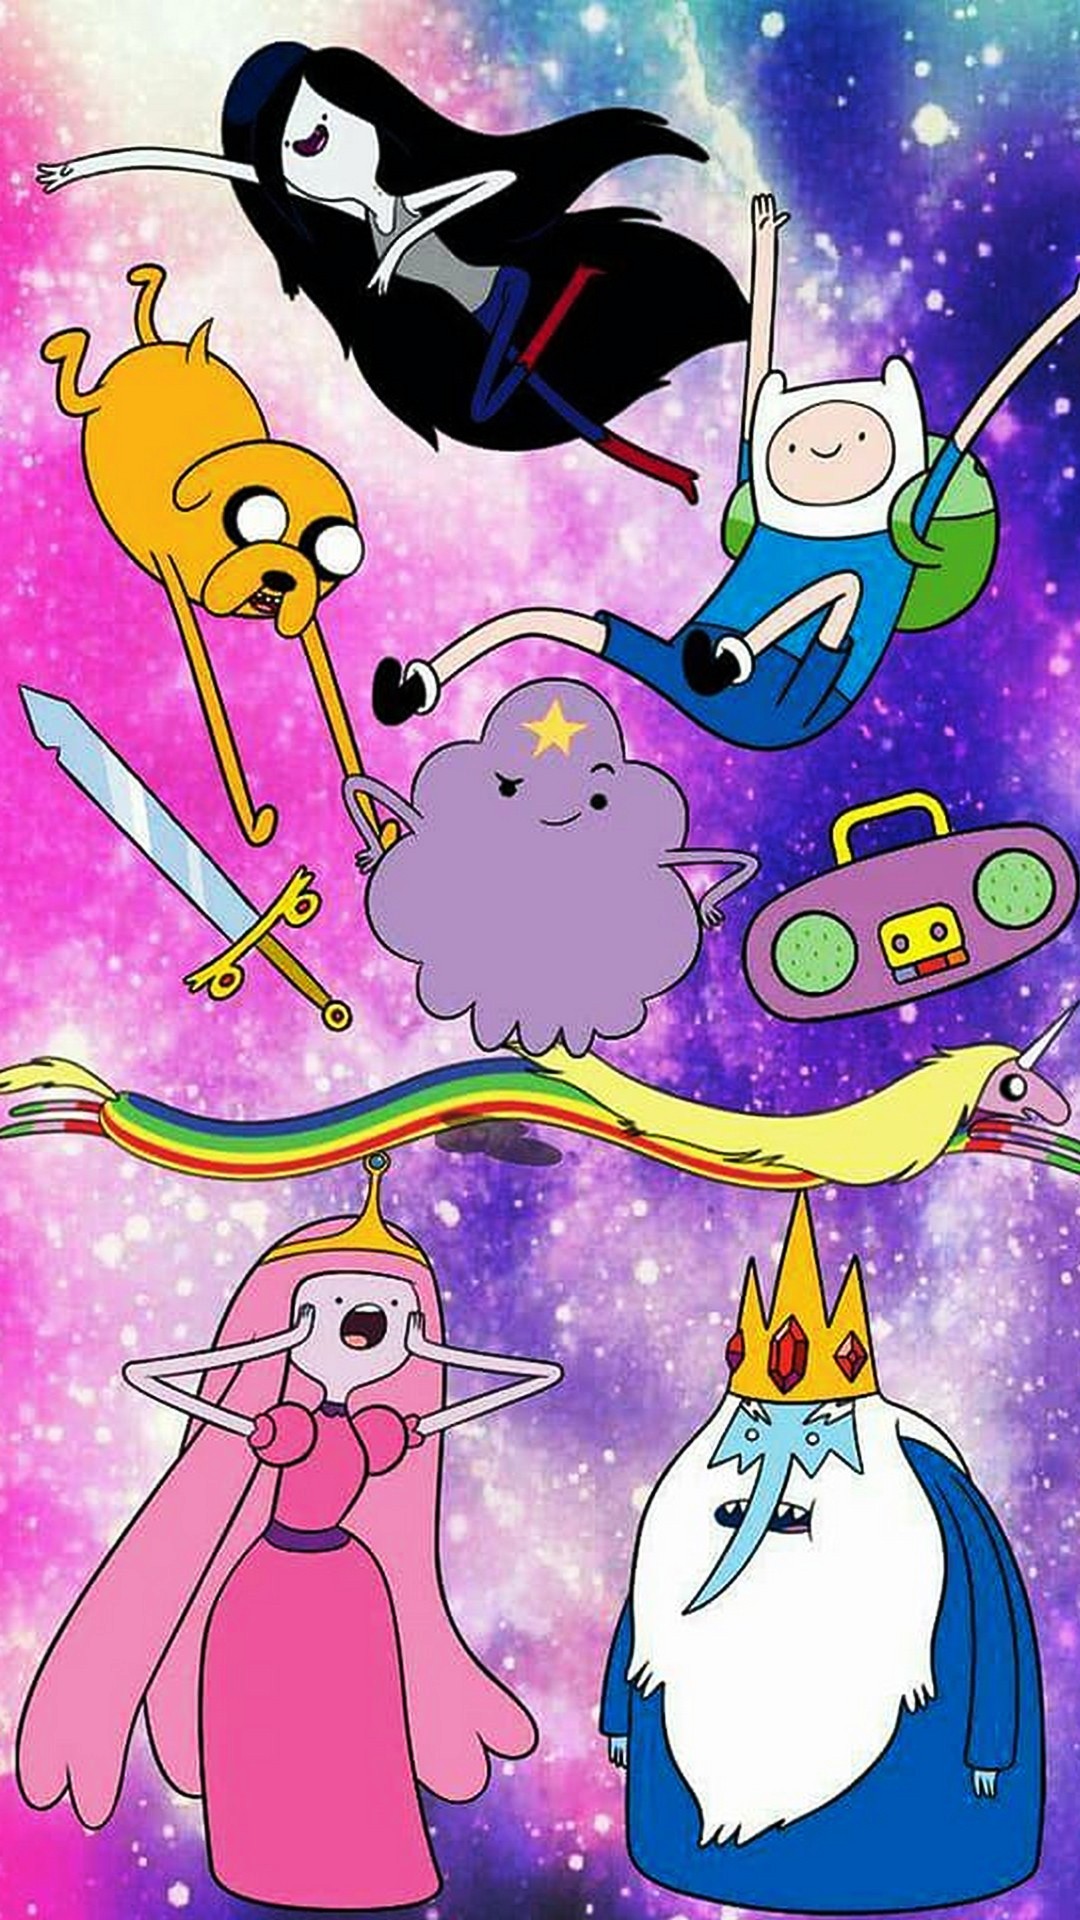 Adventure Time iPhone 6 Wallpaper HD with high-resolution 1080x1920 pixel. Download all Mobile Wallpapers and Use them as wallpapers for your iPhone, Tablet, iPad, Android and other mobile devices